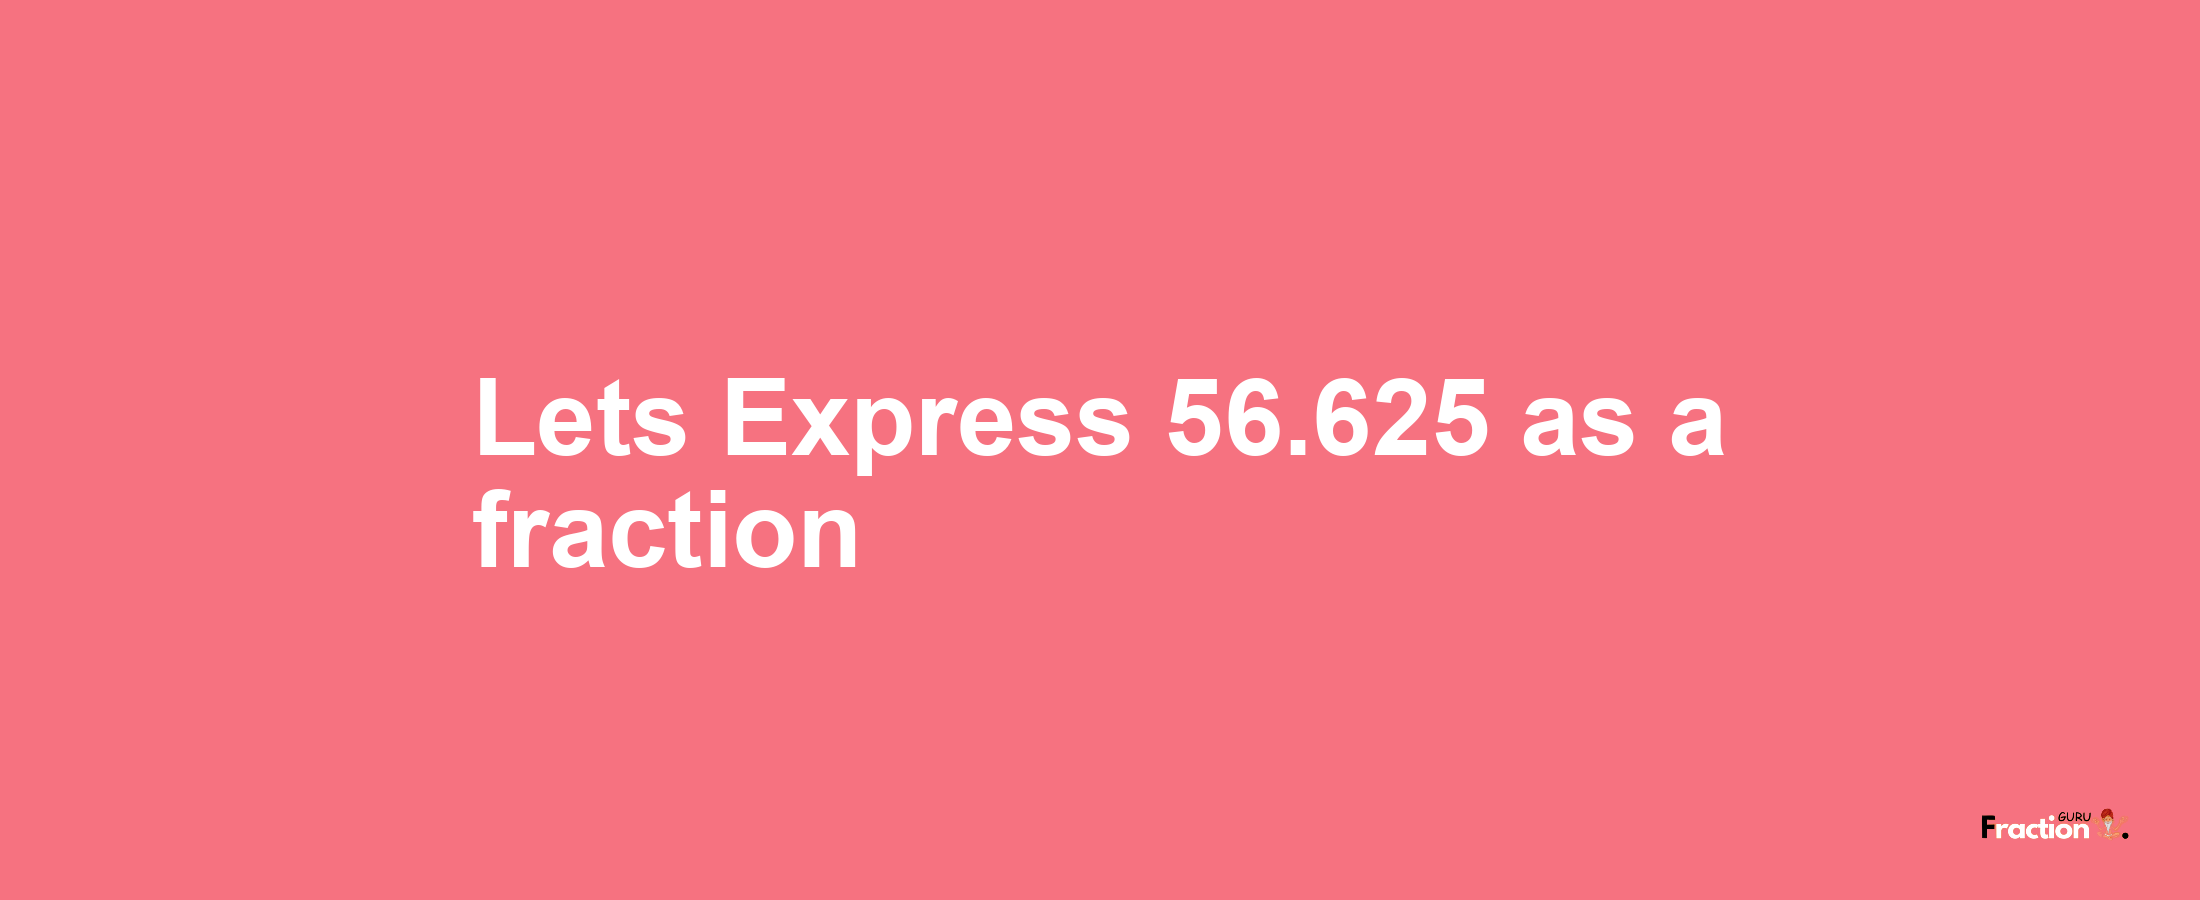 Lets Express 56.625 as afraction